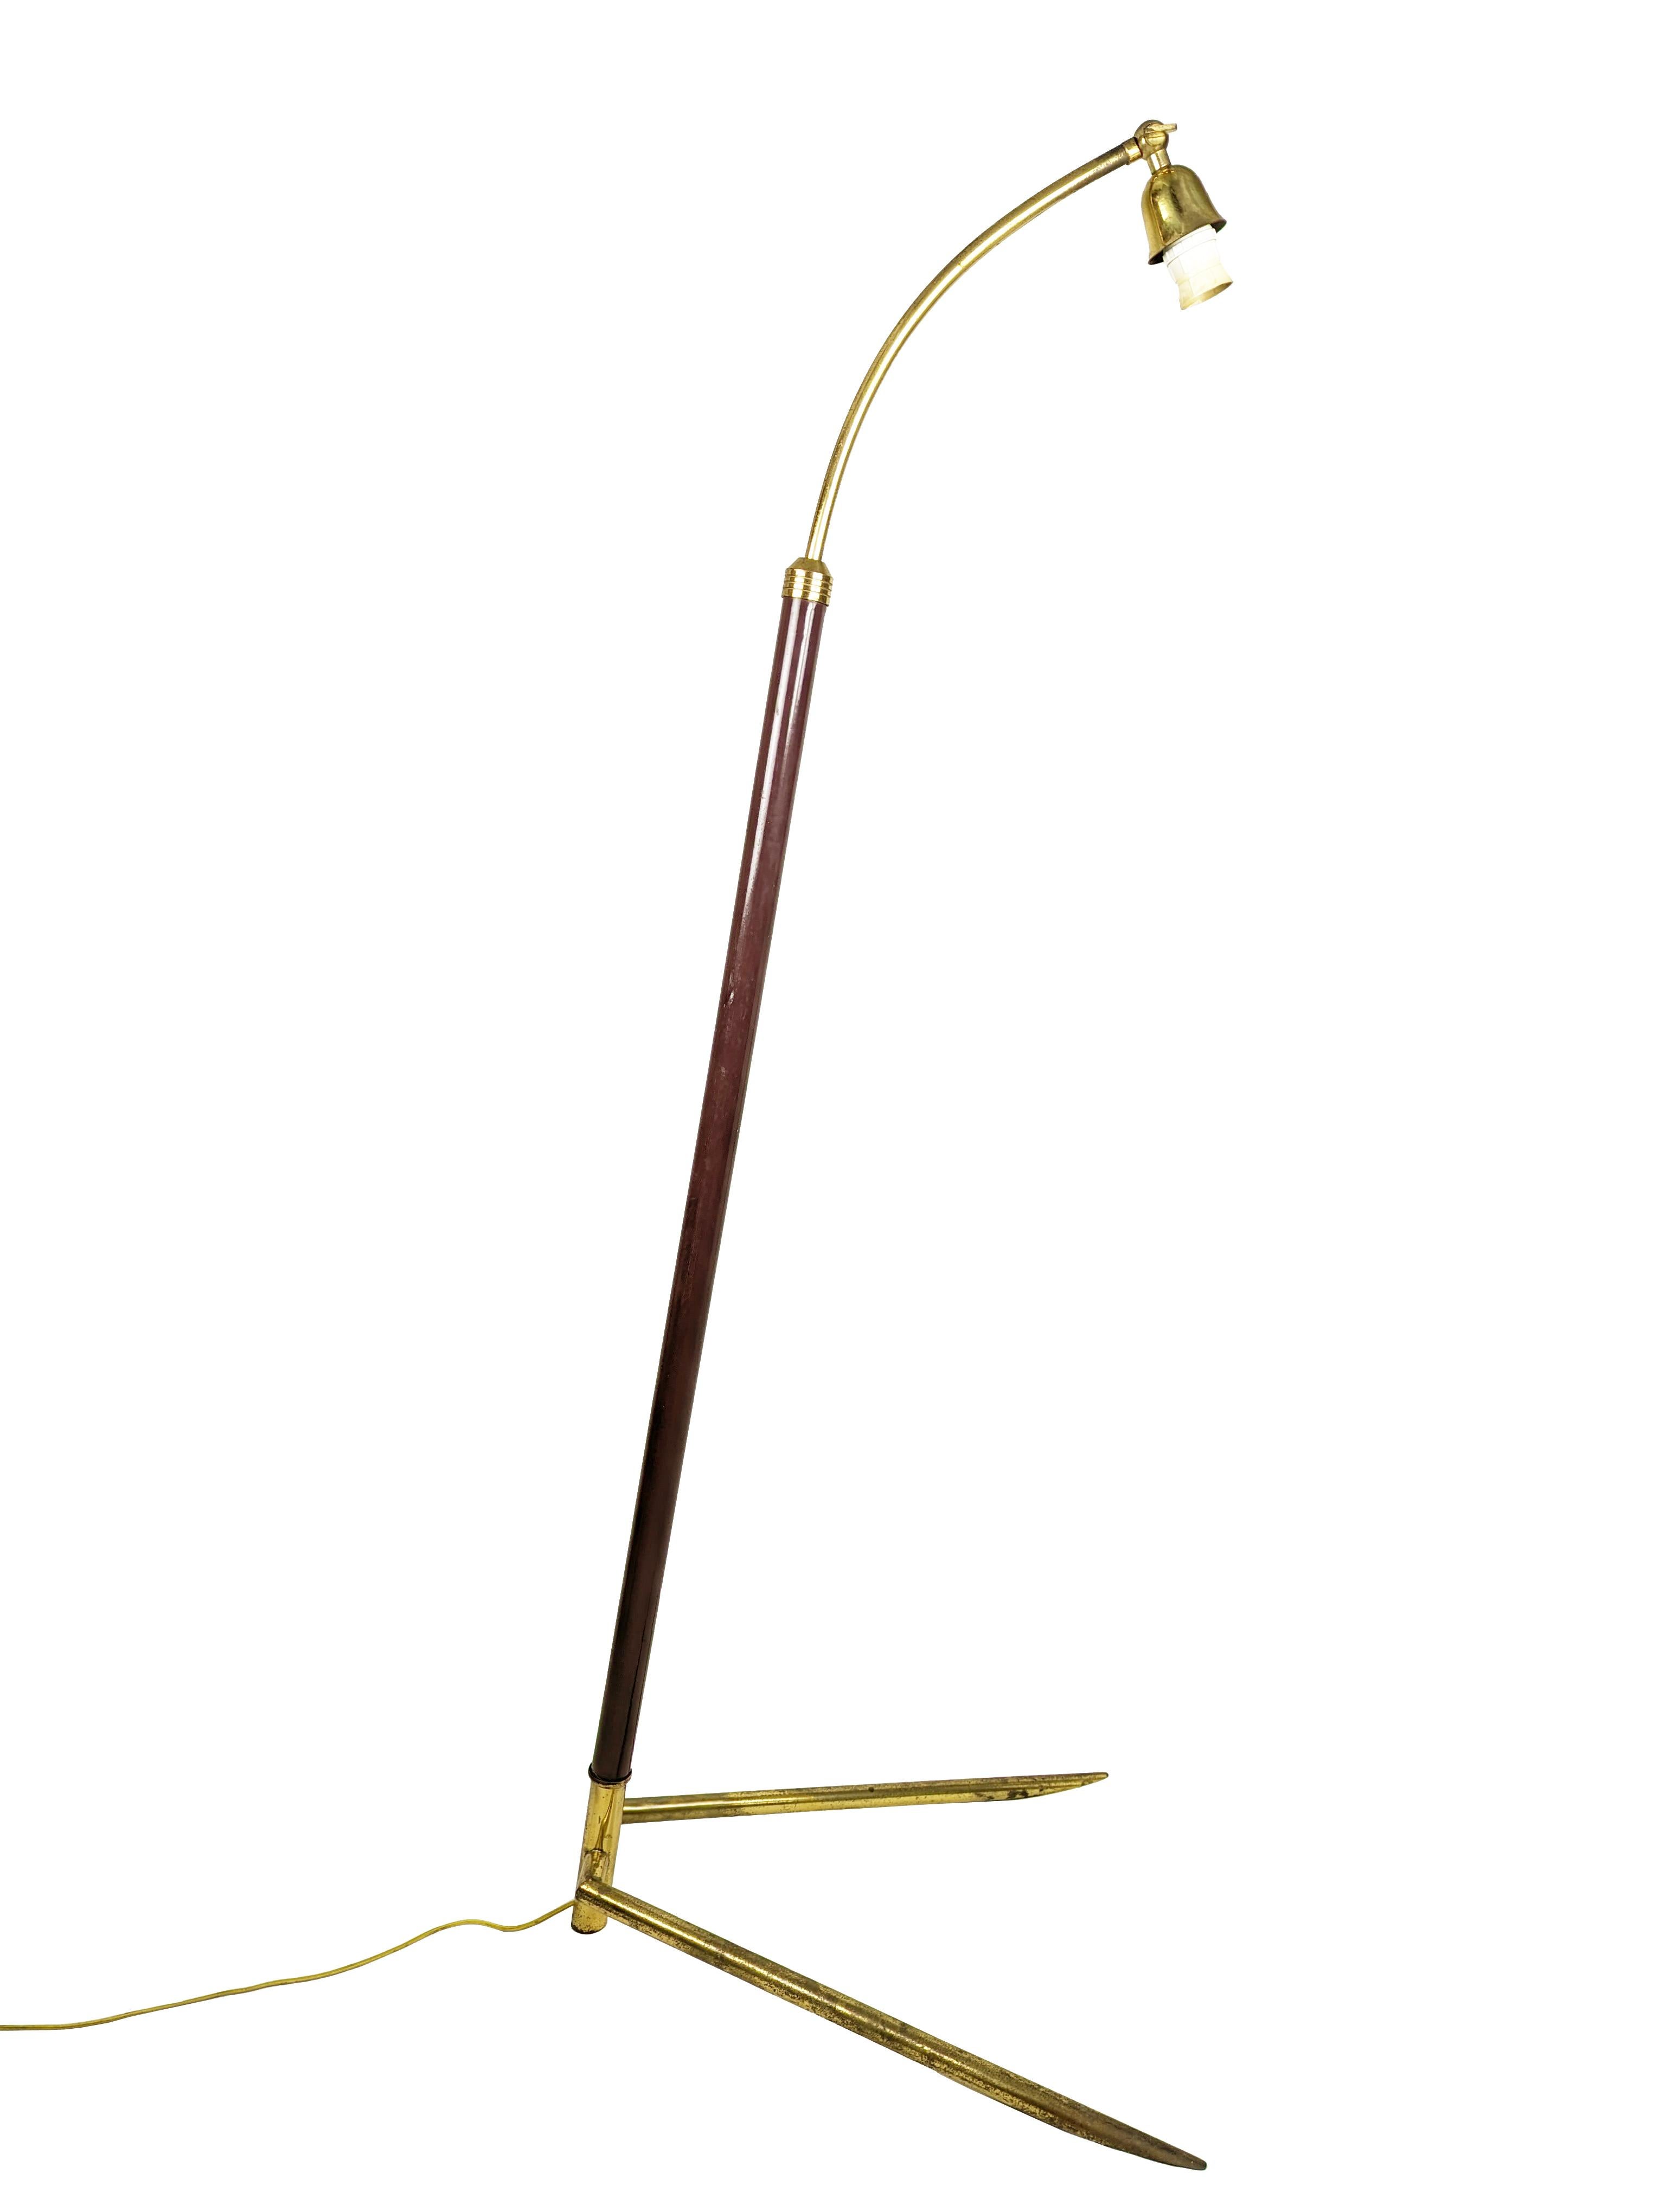 Mid-century modern floor lamp produced in Italy around the 1950 in a rare tripod base version. Brass base, burgundy painted rod with adjustable height: from cm 138 to 200 max. The lamp remains in working condition: the electrical system has been